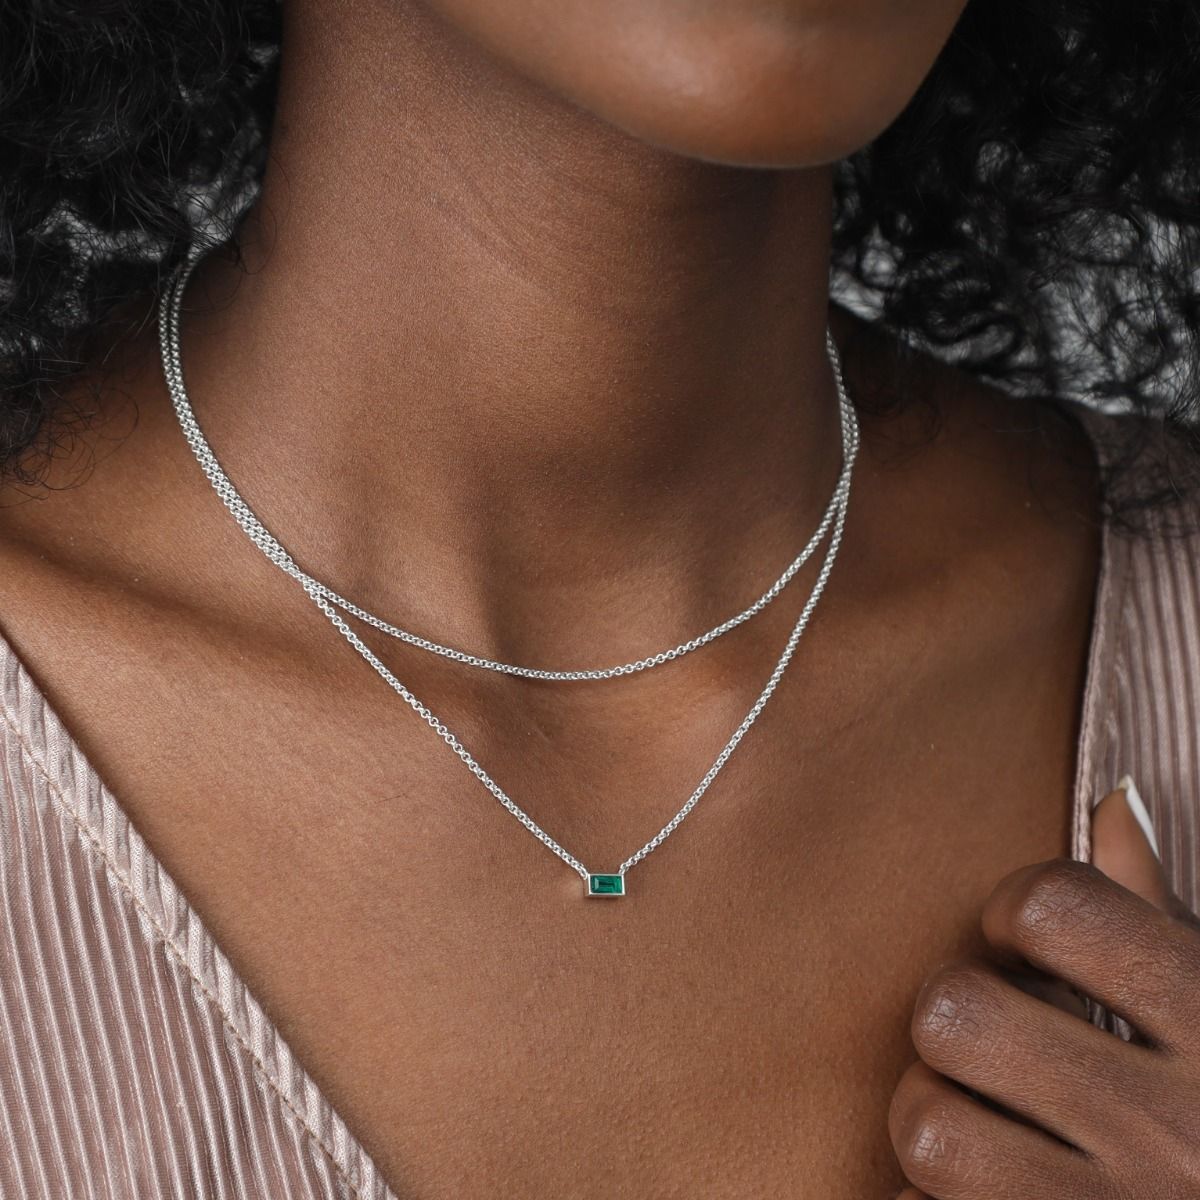 Genuine Emerald Necklace for Her in Silver - Black Friday Jewelry Deals